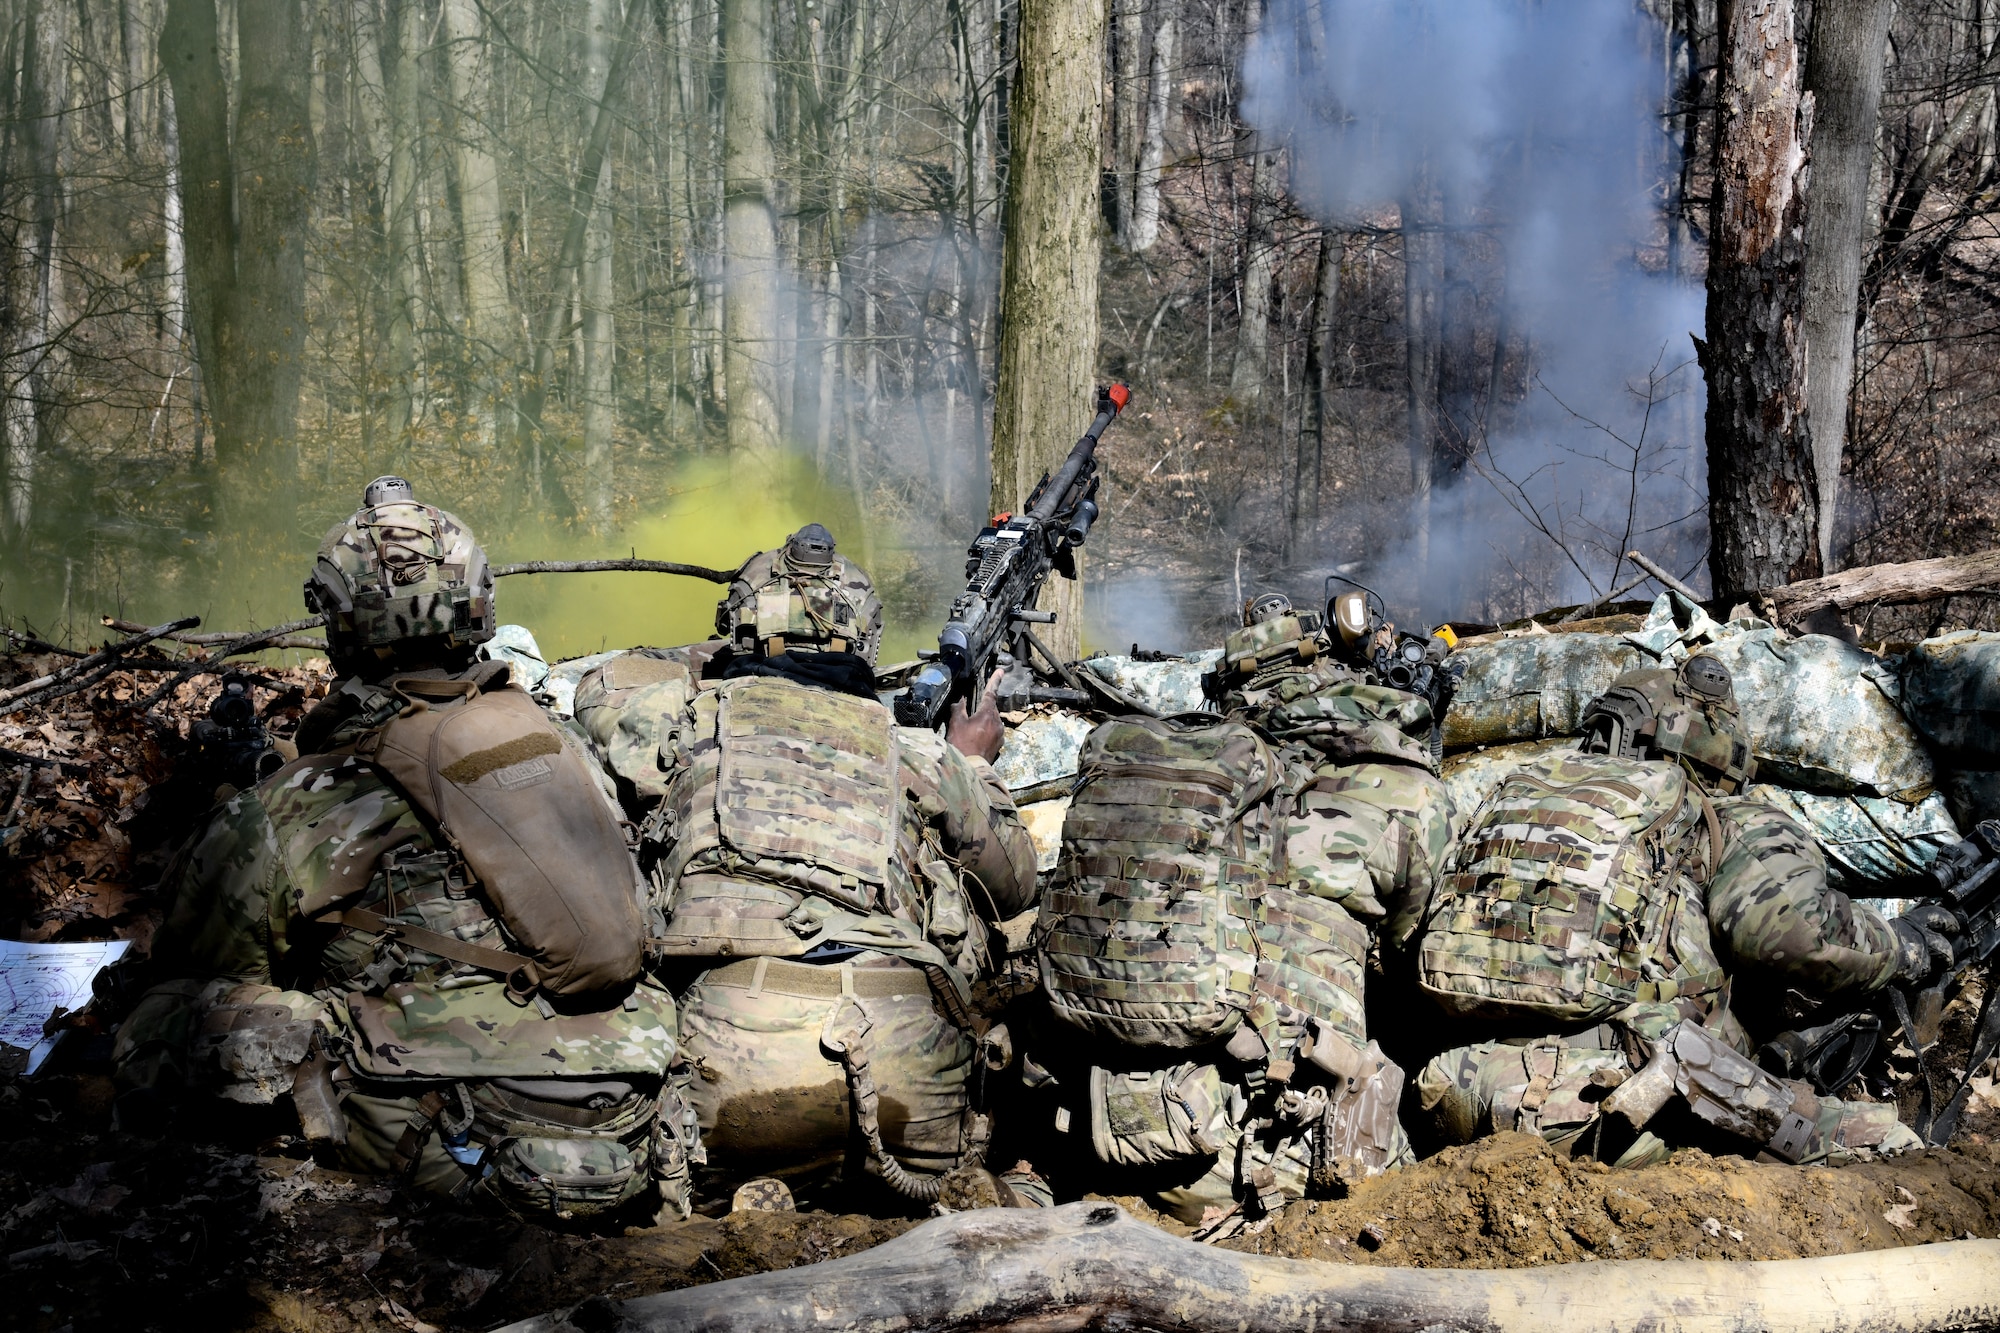 Reserve Citizen Airmen assigned to the 459th Security Forces Squadron, Joint Base Andrews, Maryland, take cover during a static defense exercise on March 20, 2023, at Camp James A. Garfield Joint Military Training Center, Ohio.